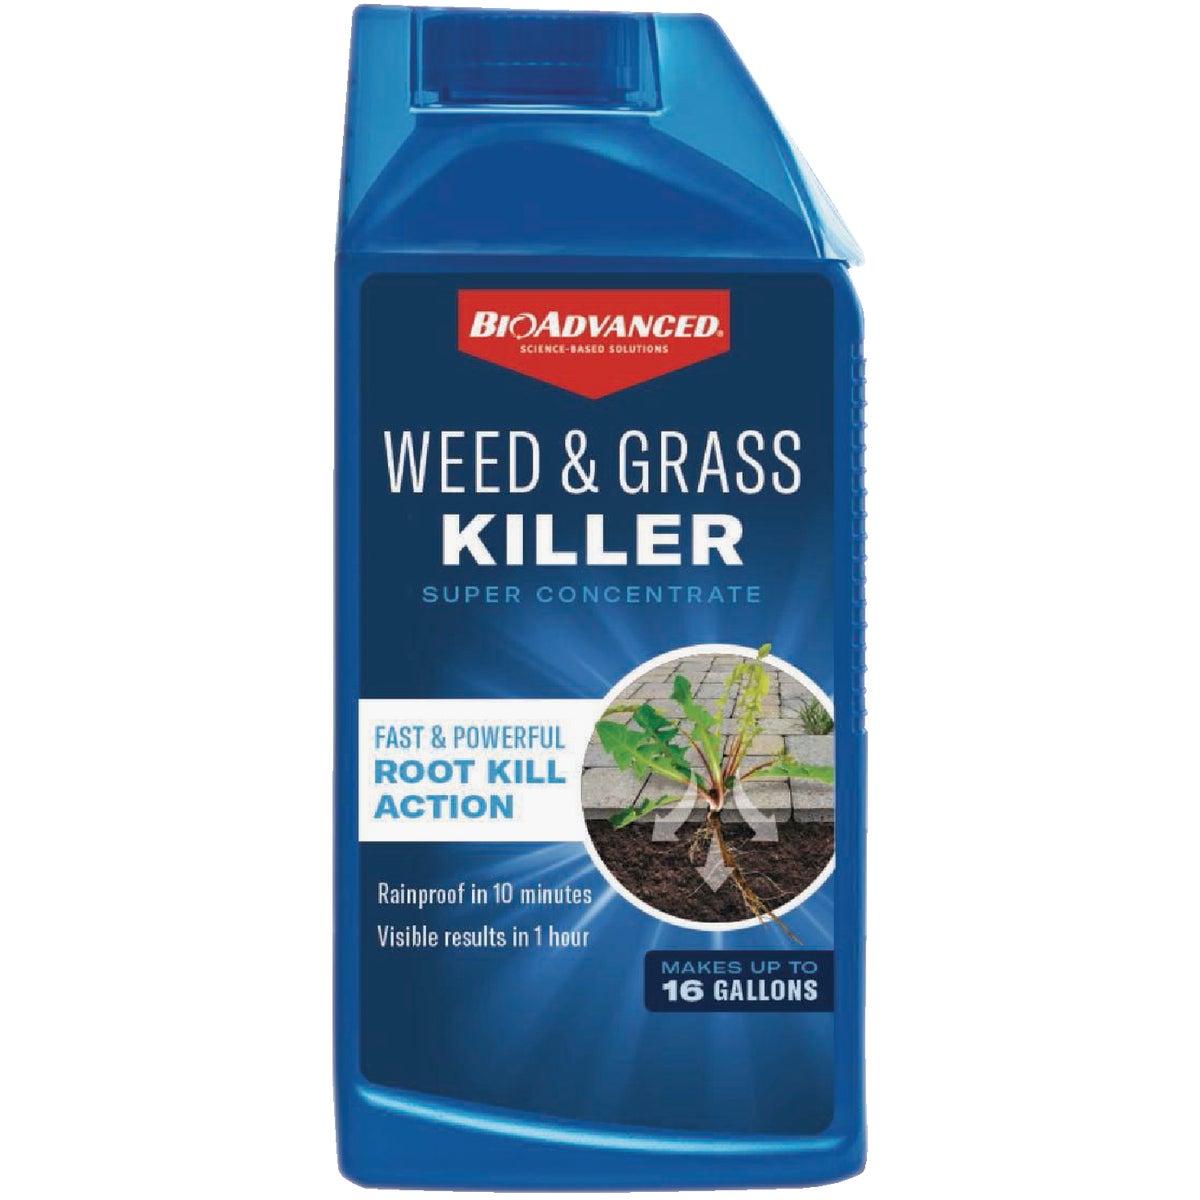 BioAdvanced 32 Oz. Concentrate Weed & Grass Killer